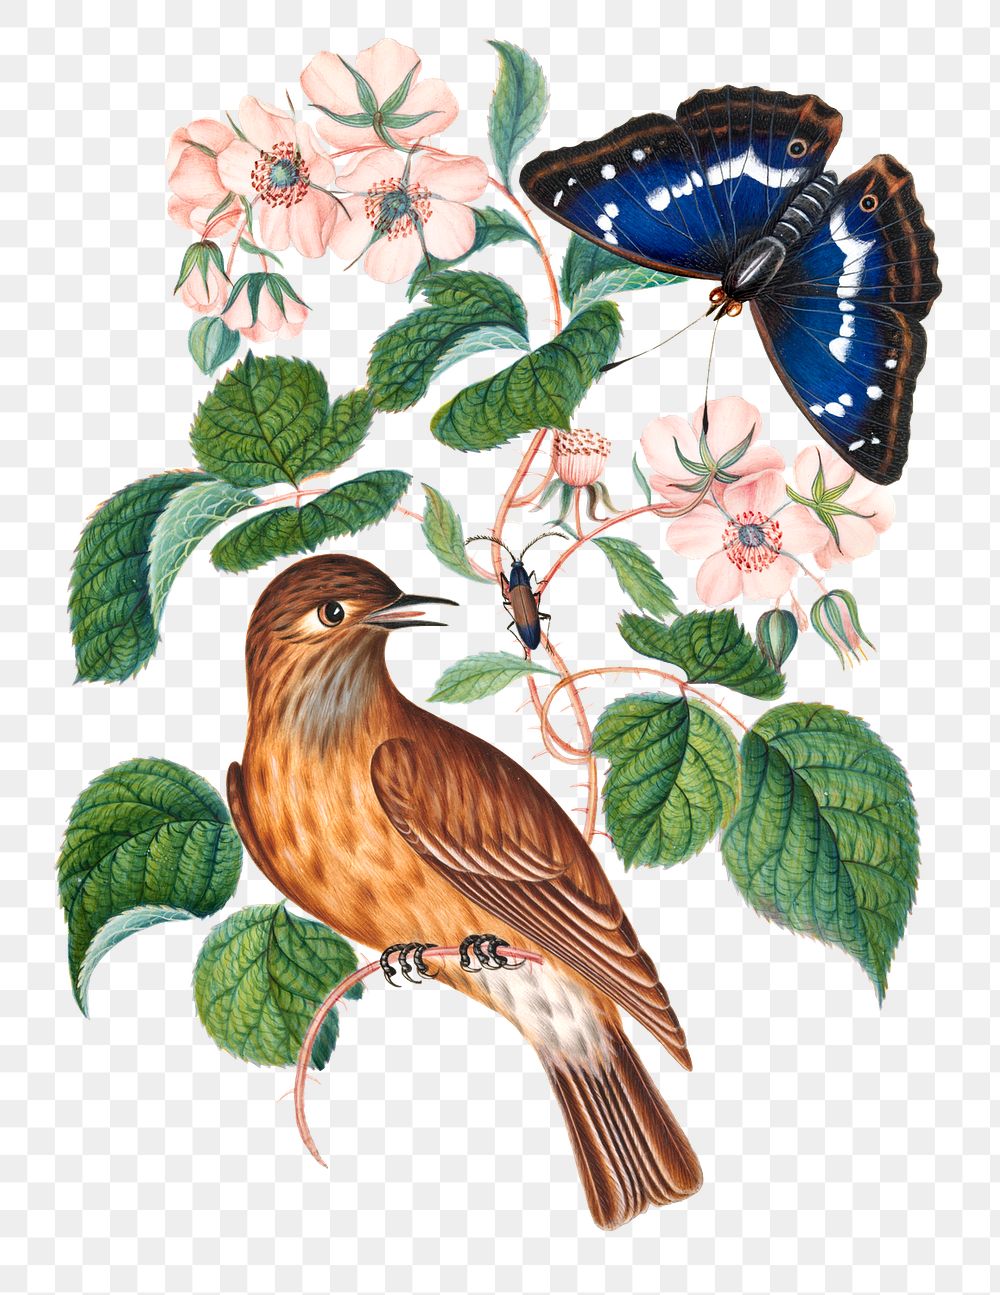 Bird, butterfly png sticker, botanical flower, watercolor painting, remixed from artworks by James Bolton